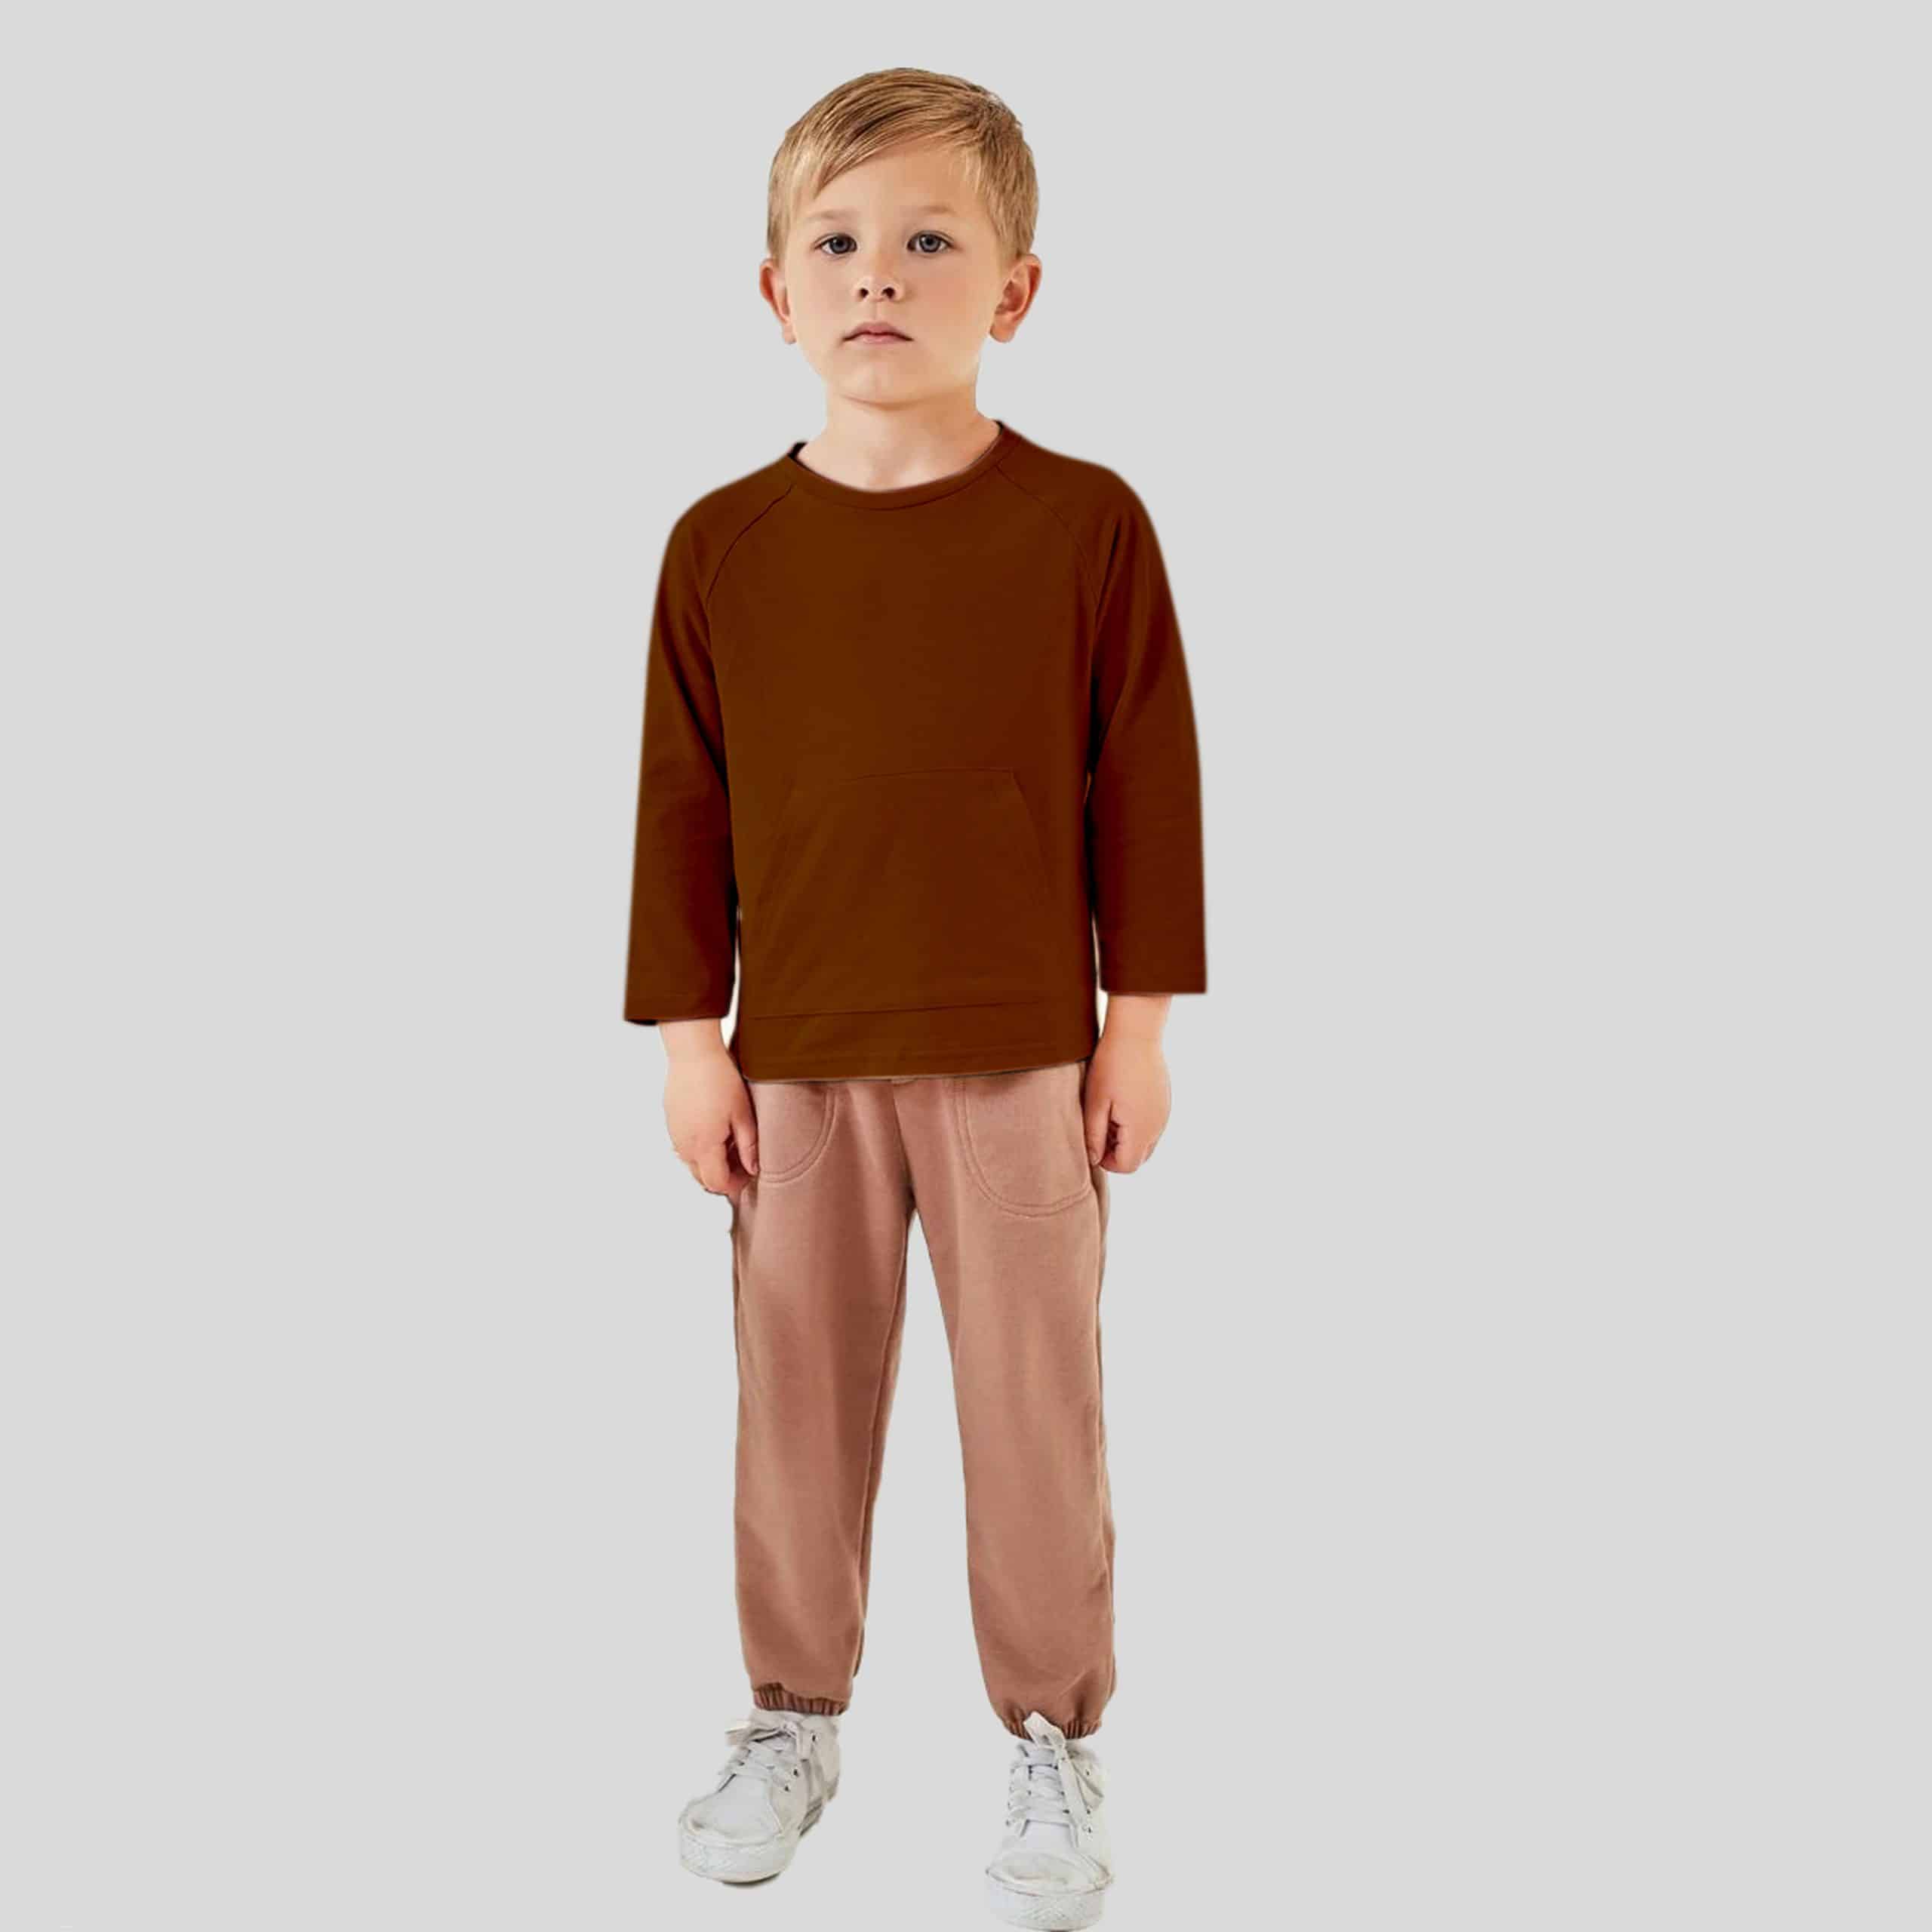 Boys Long Sleeve T-Shirt with Front Pockets - RKFCW364